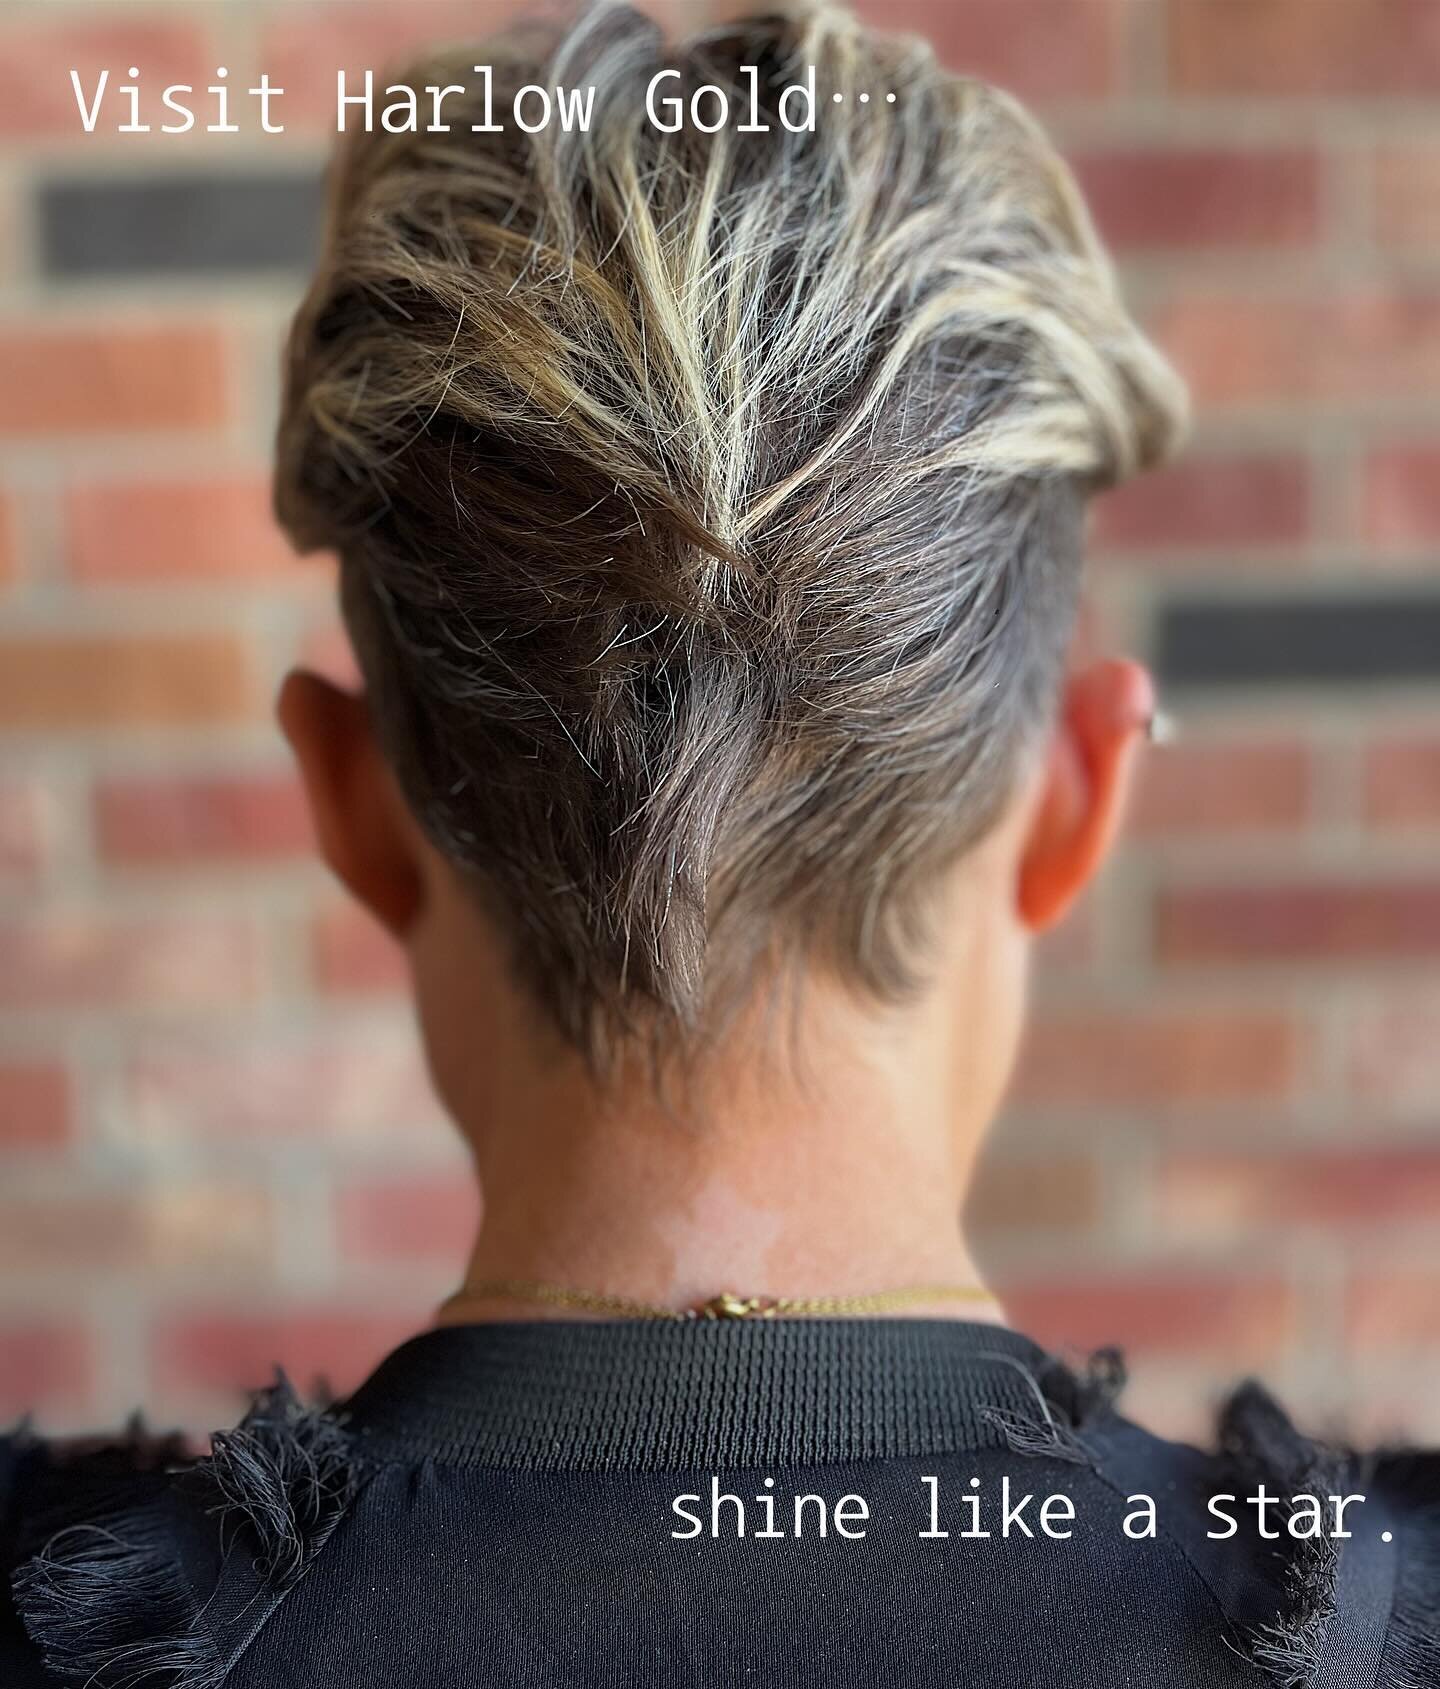 🌟 Visit Harlow Gold, shine like a star 🌟 

#hairsalon #oribeobsessed #modernsalon #fortcollins #northerncolorado